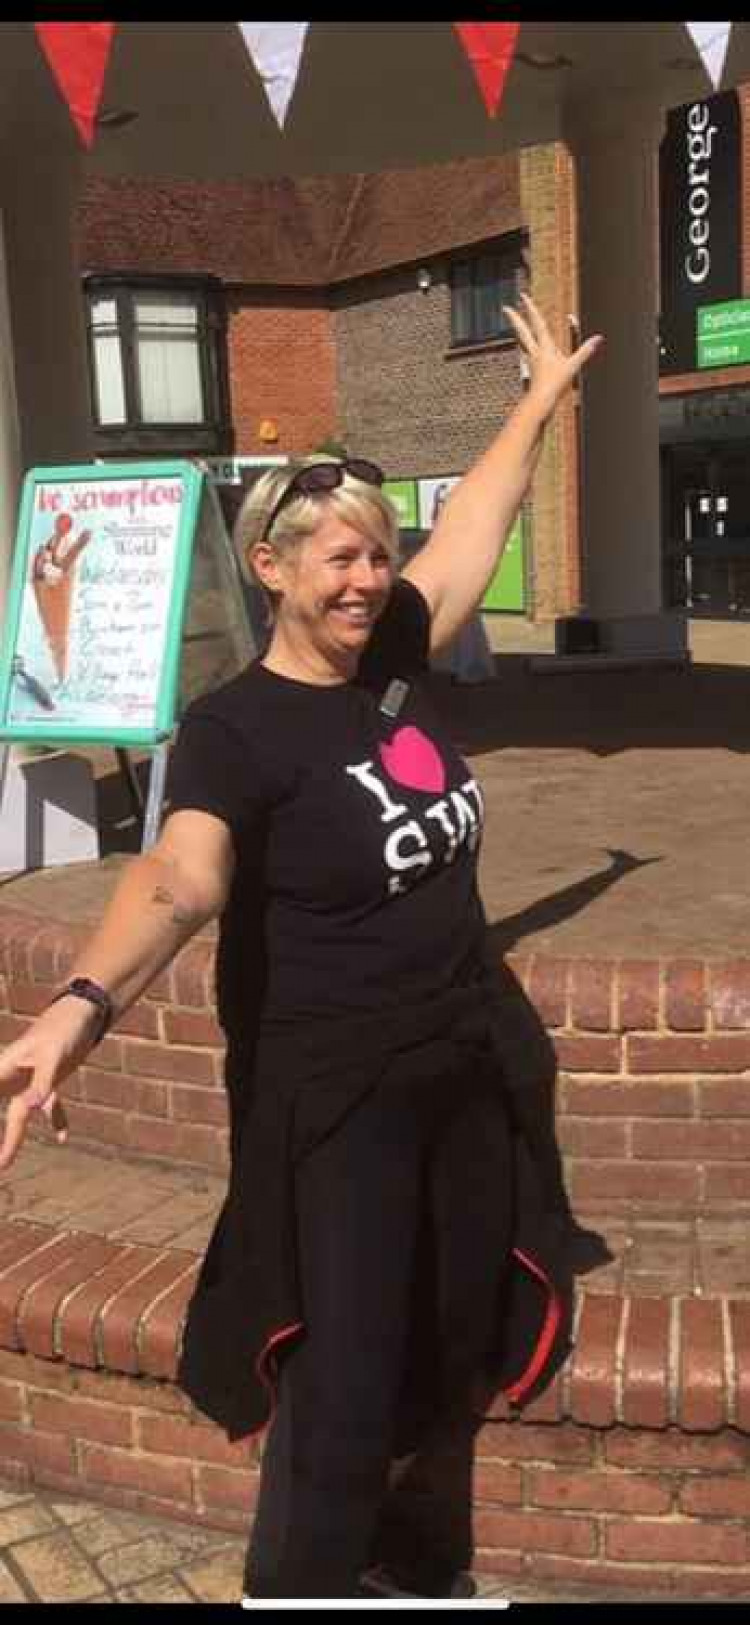 Kay Driscoll, one of the Slimming World consultants in the Maldon team